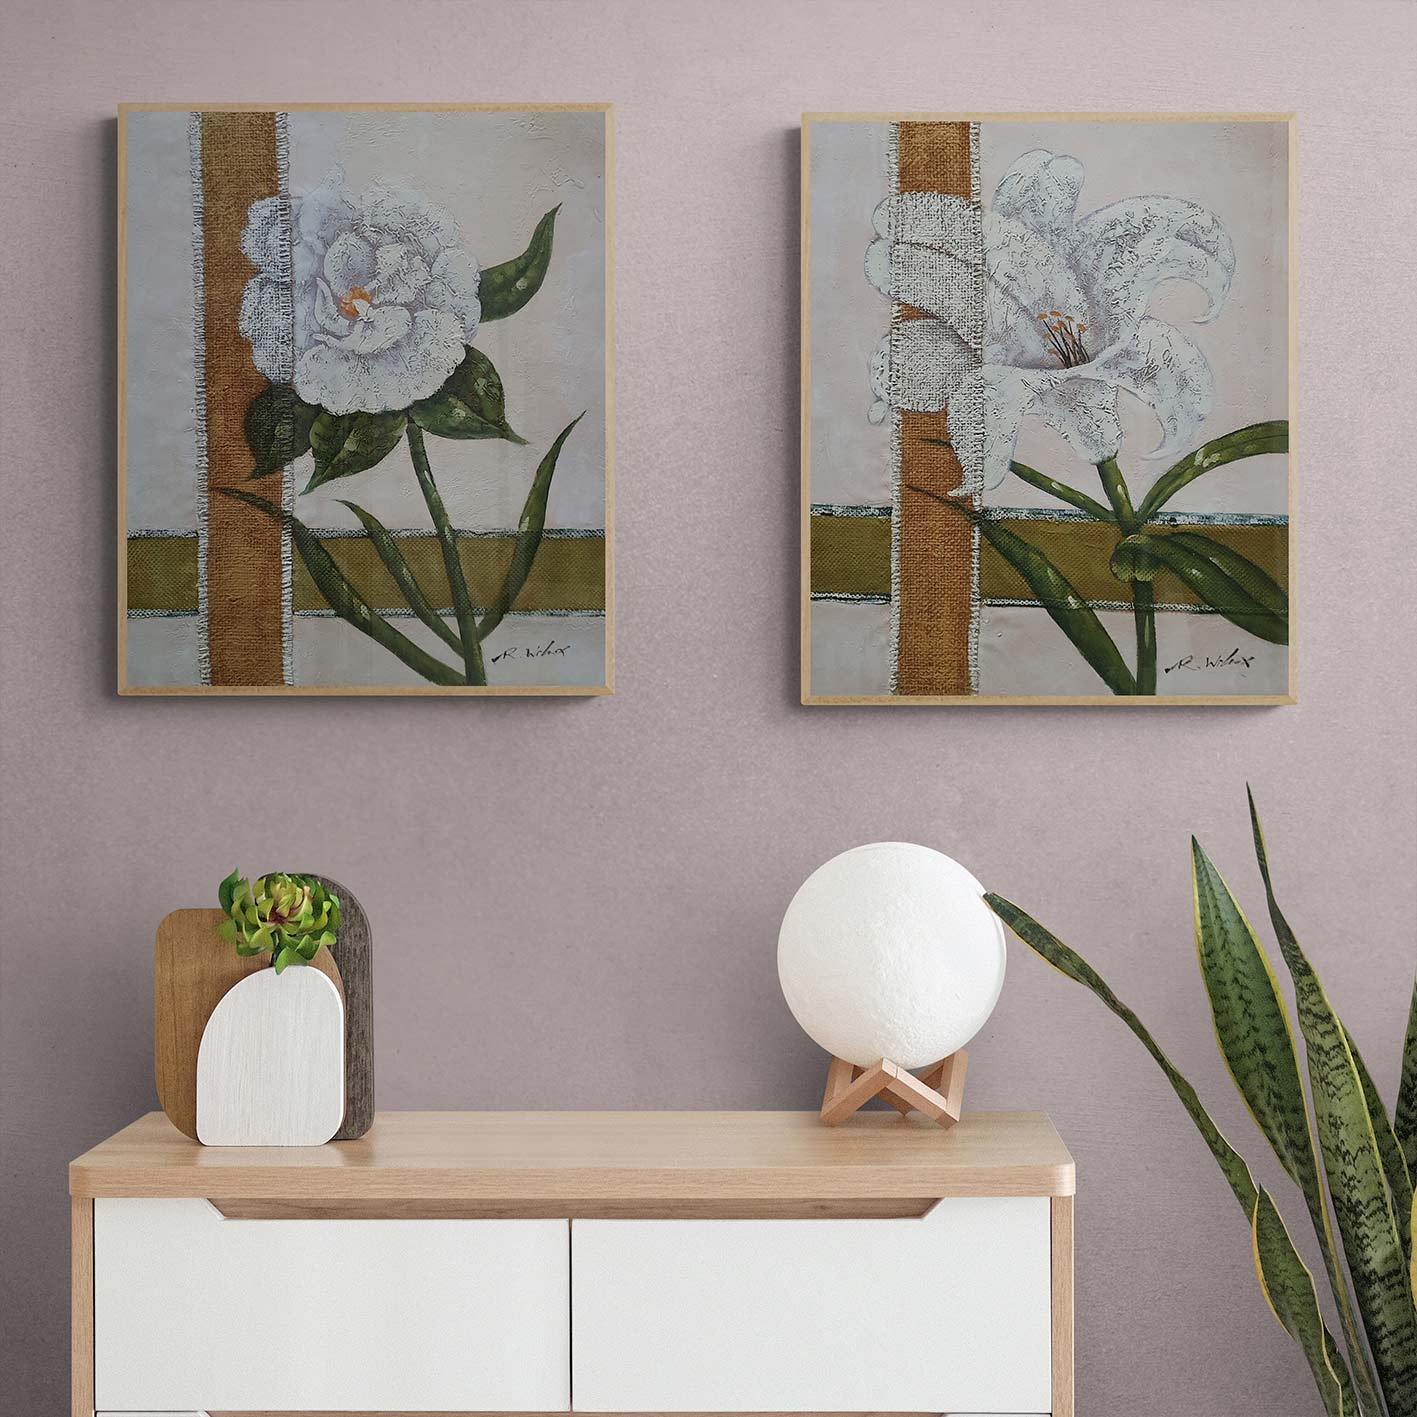 Sack Flowers Diptych Painting 50x60 cm [2 pieces]